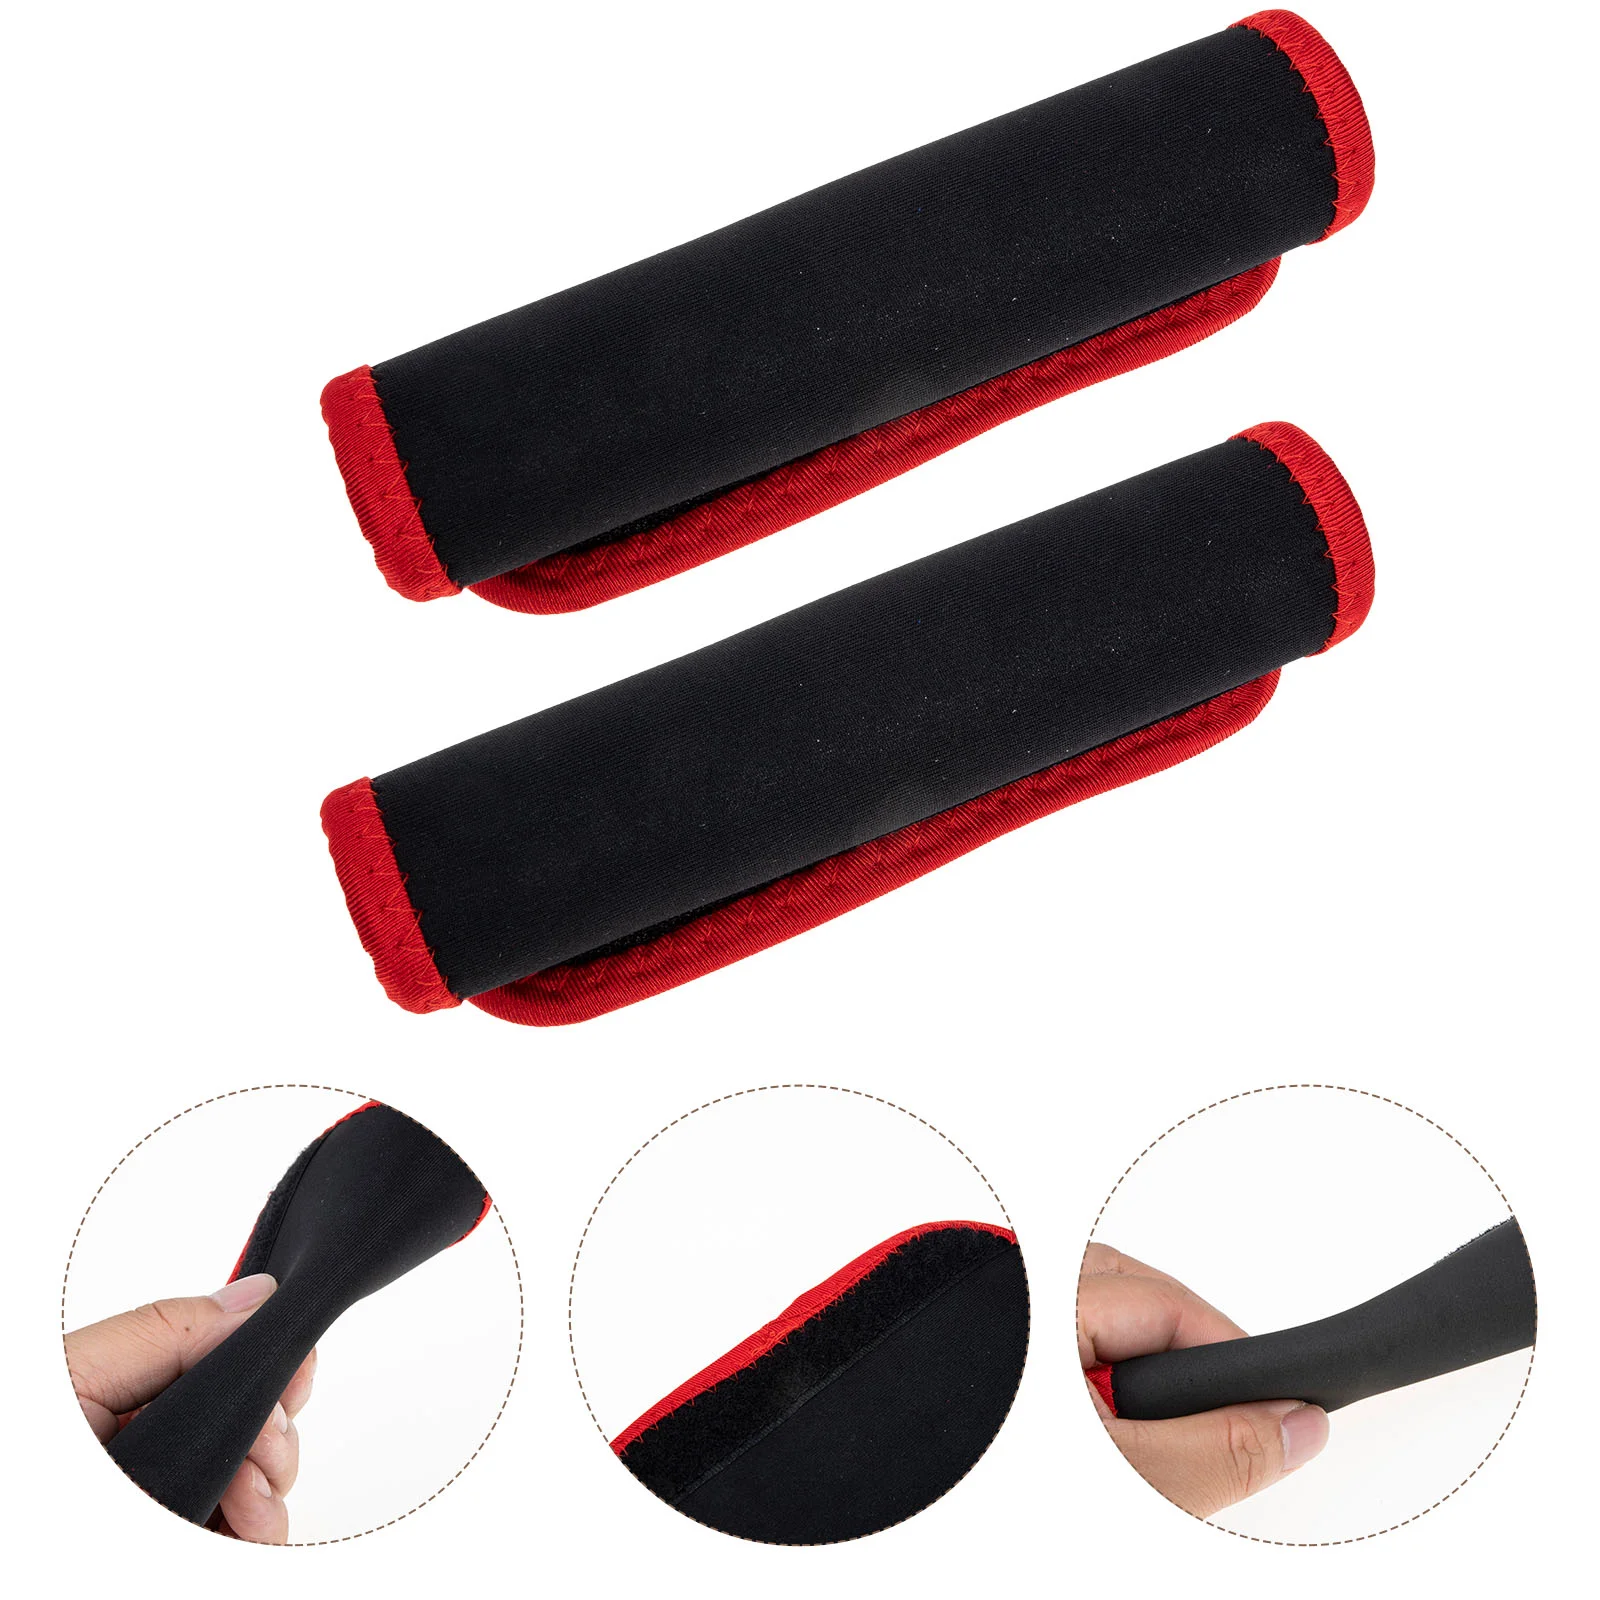 

2 Pcs Barbell Grip Pad Motion Pro Handle Lifting Cushions Gloves Washable Grips Portable Neoprene Supplies Convenient Pads Man